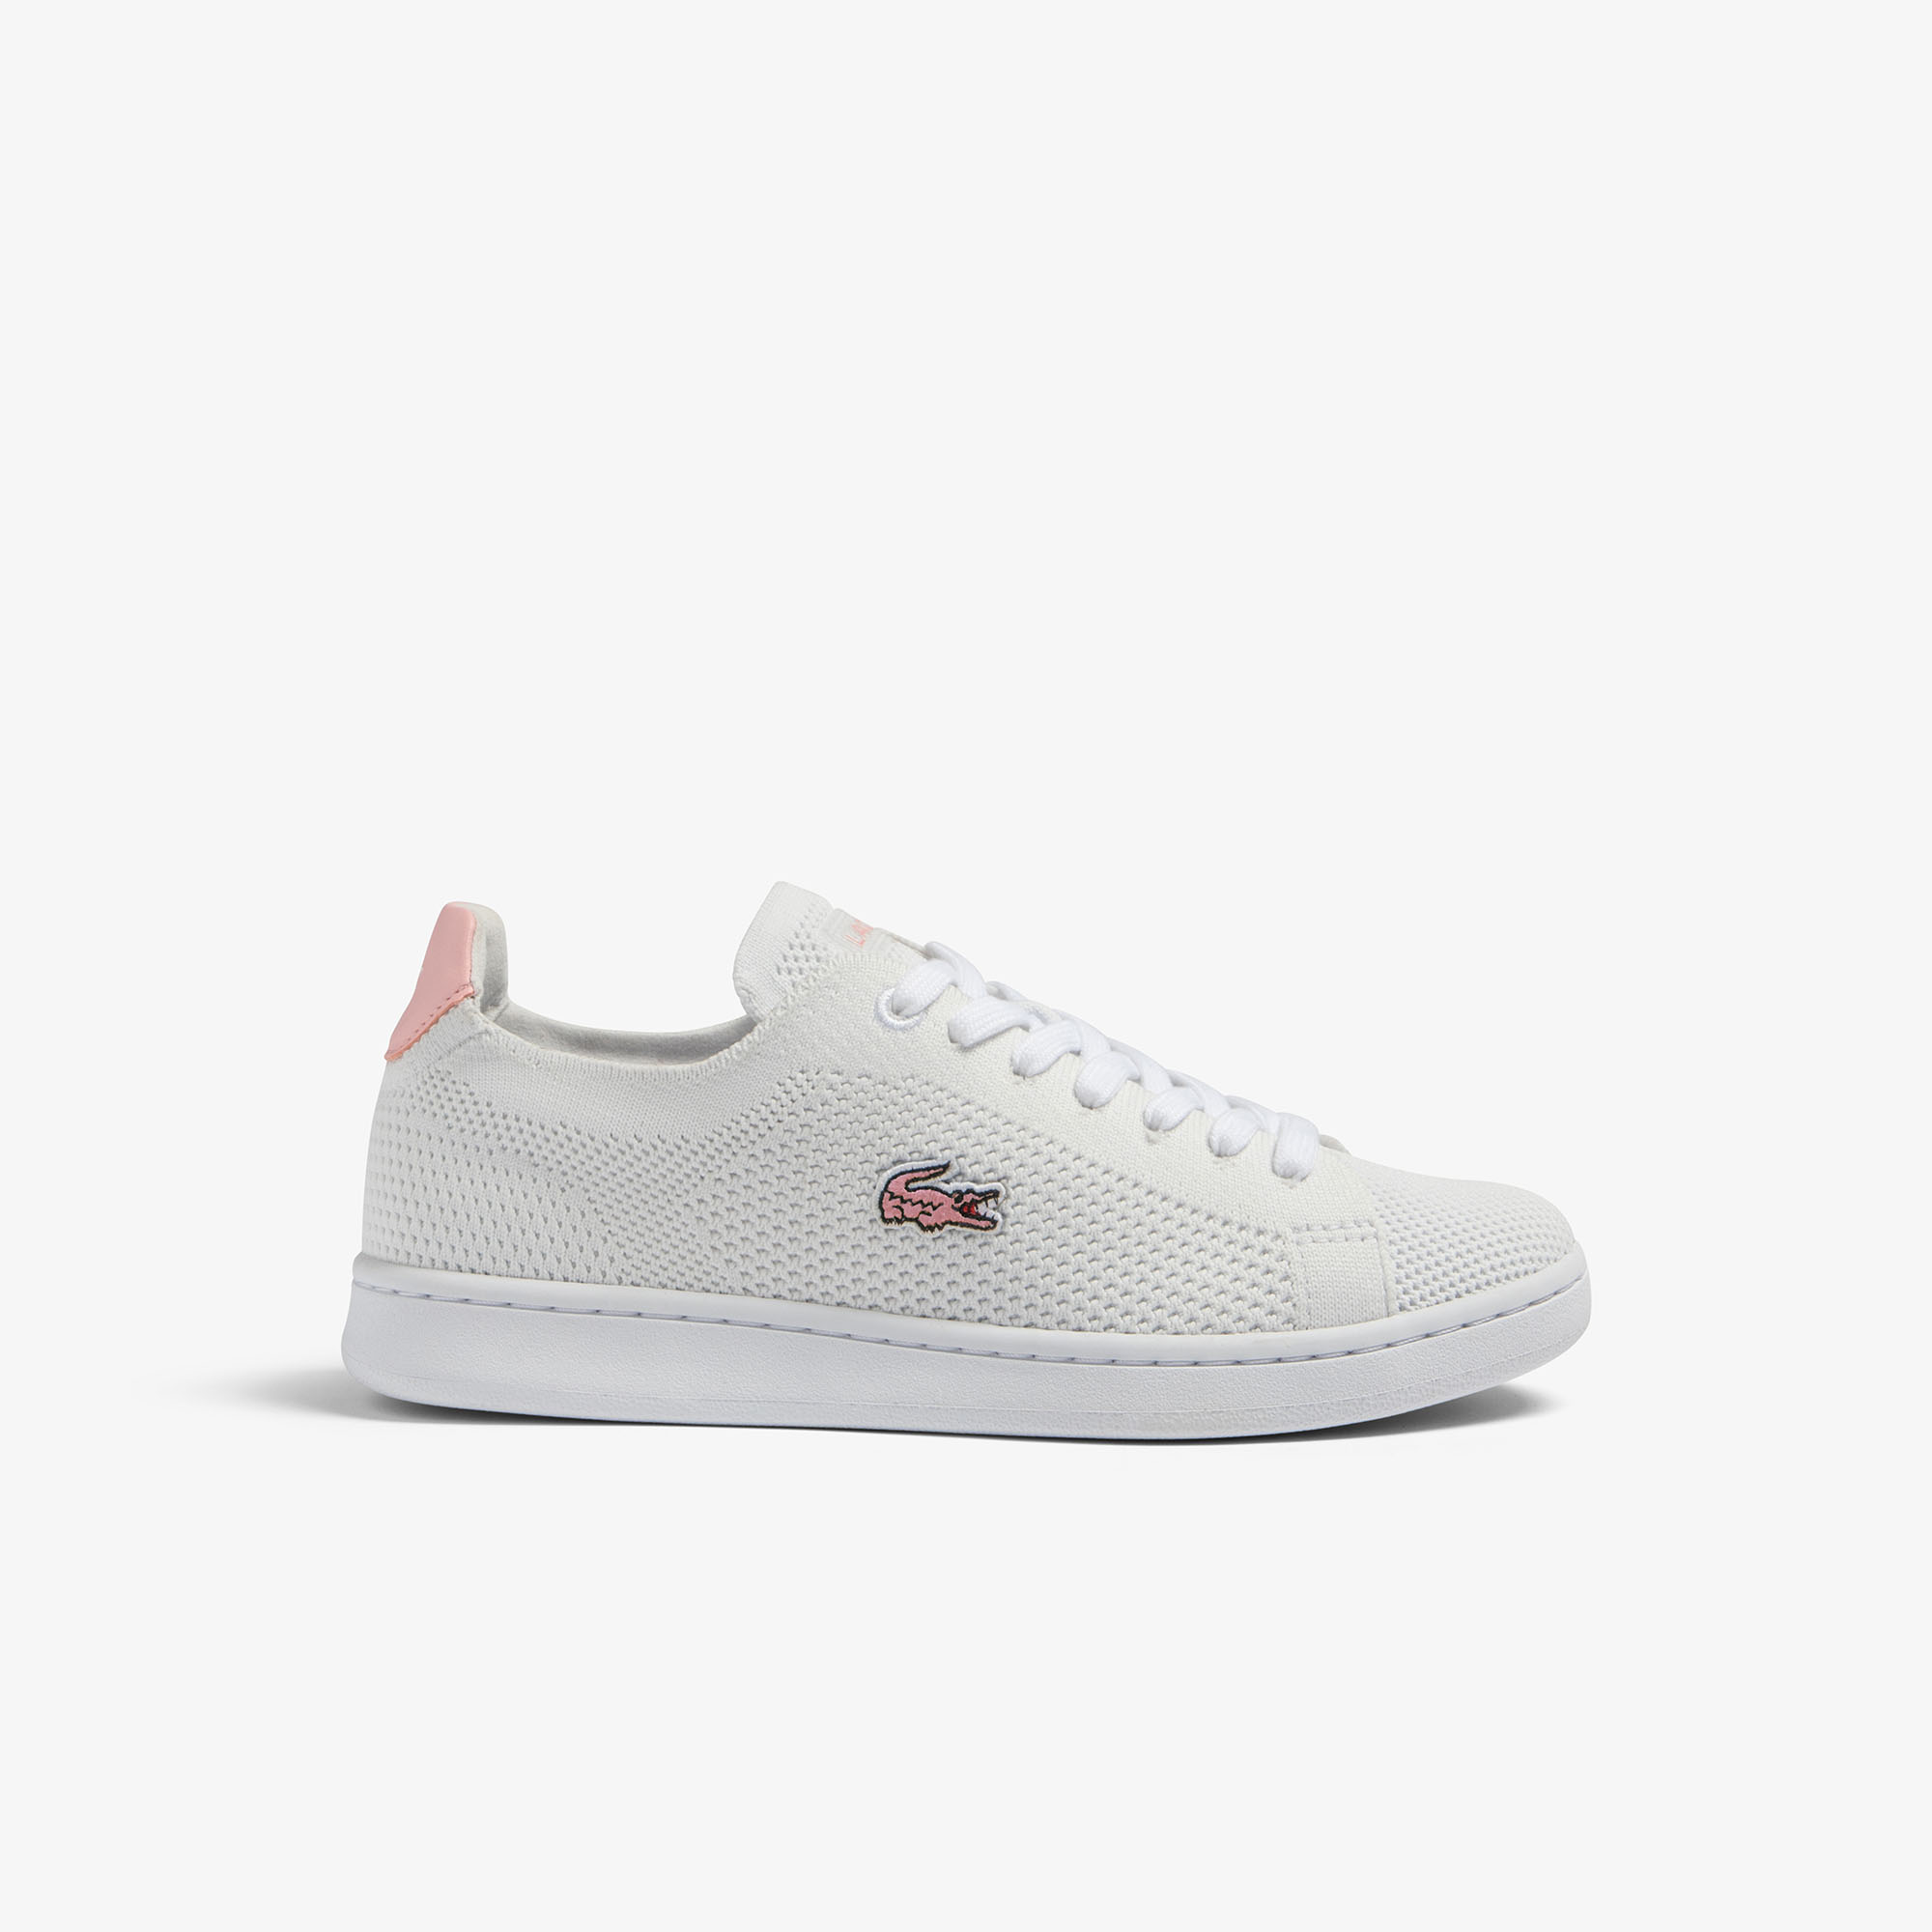 Lacoste tenisky CARNABY PIQUEE